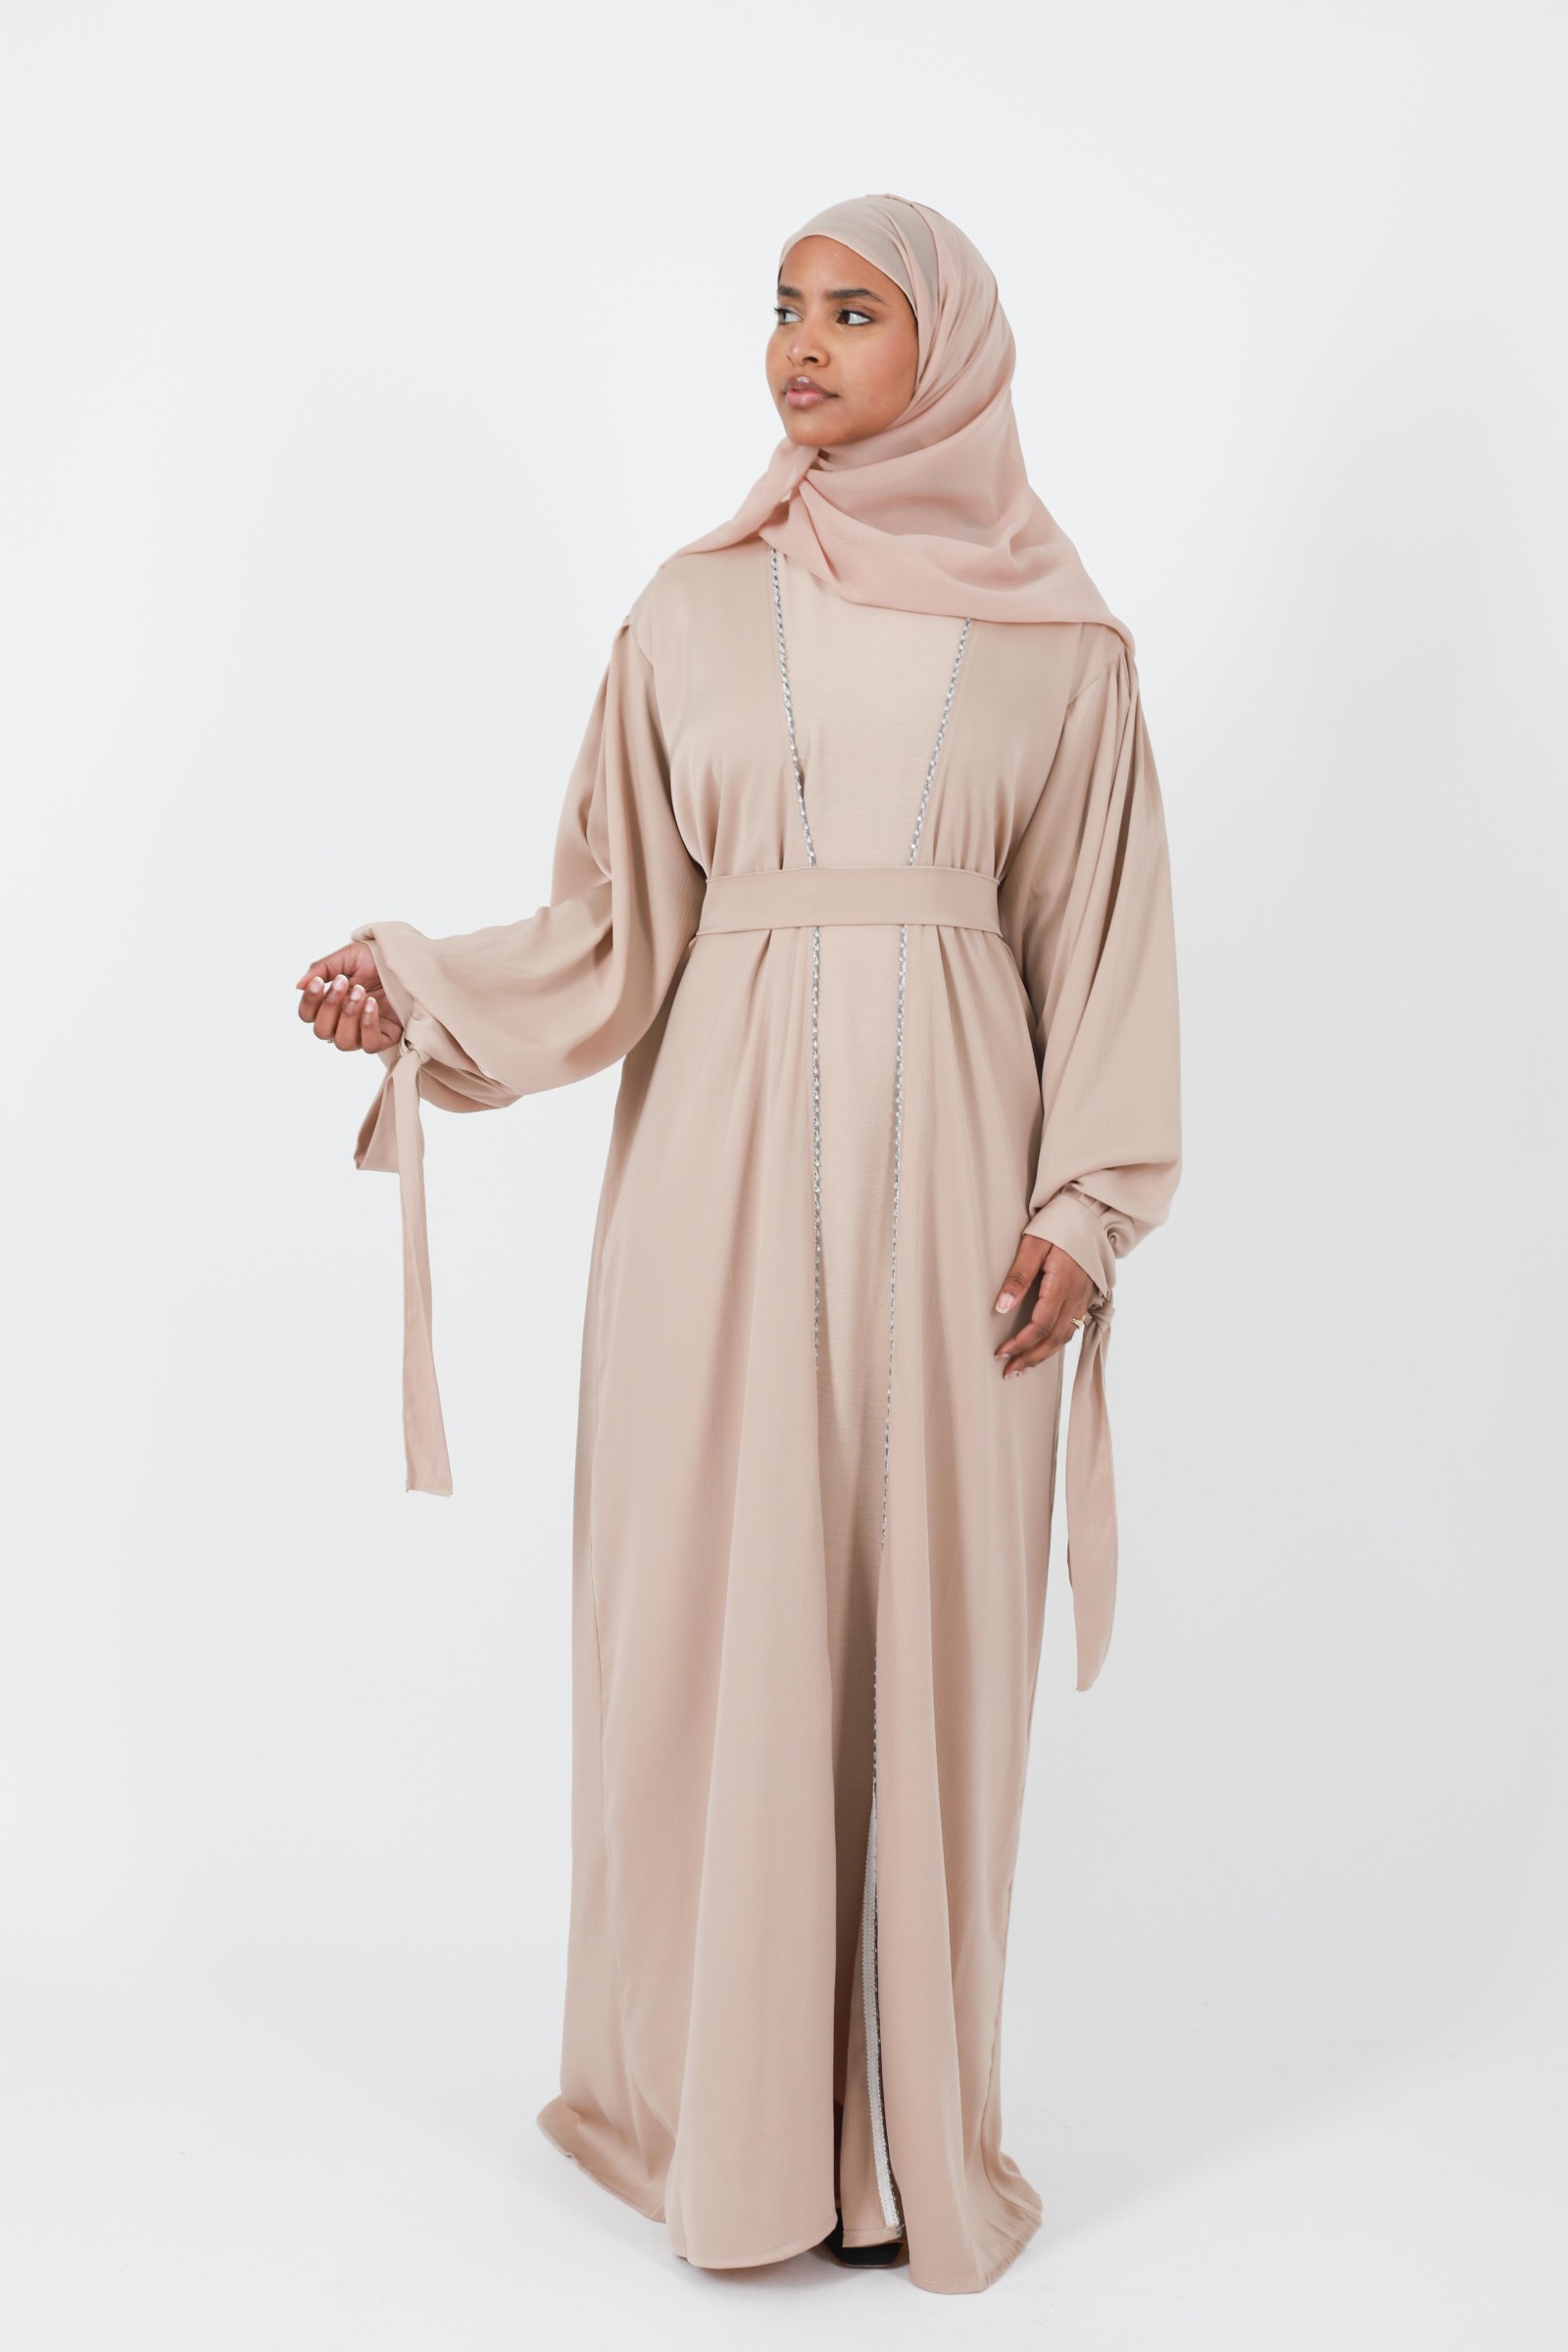 Party outfit for aid events, wedding, abaya dubai Muslim woman